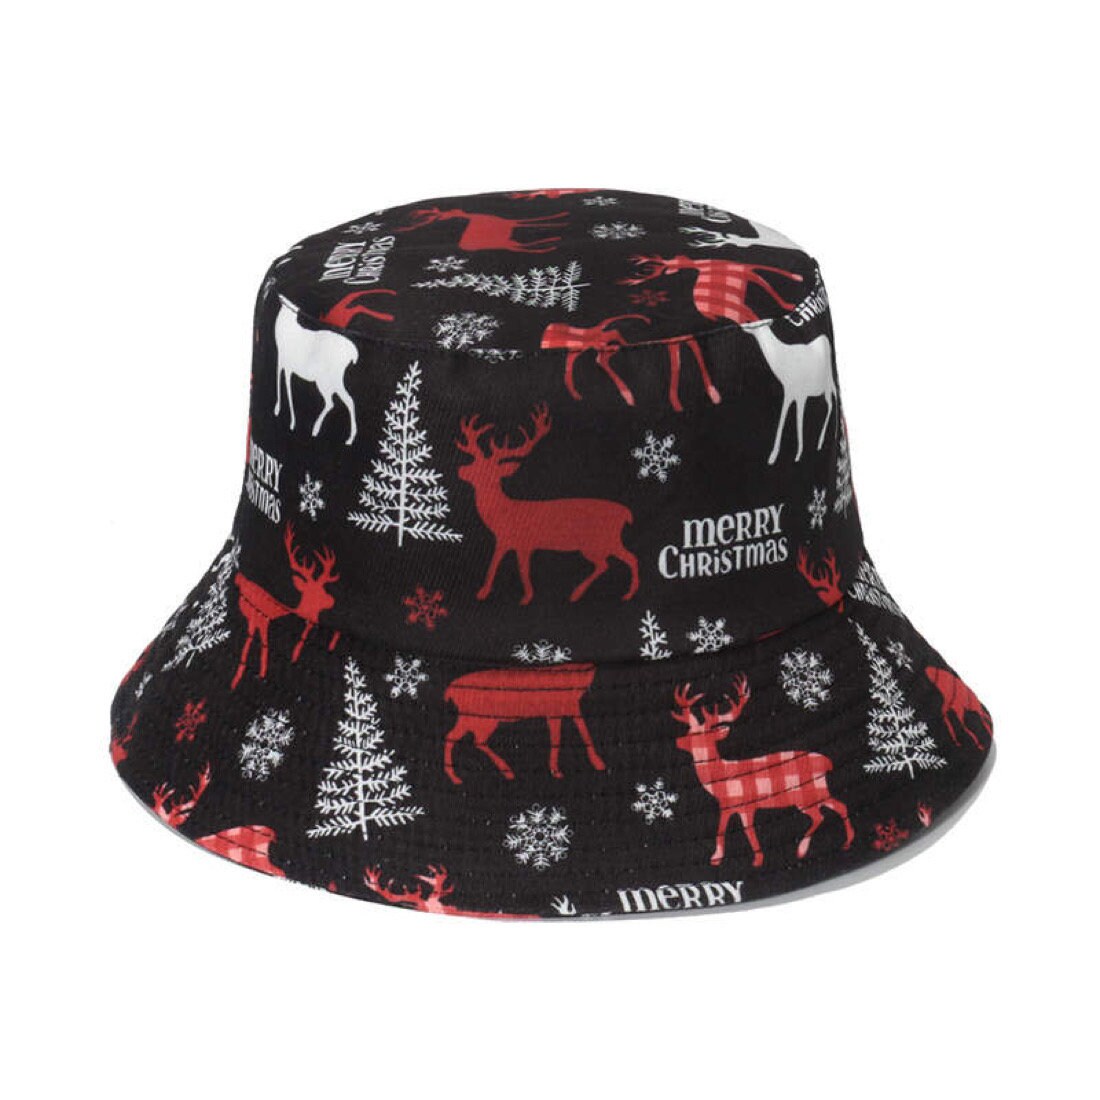 Skater Photo Printed Bucket Hat with Red Rectangle Print